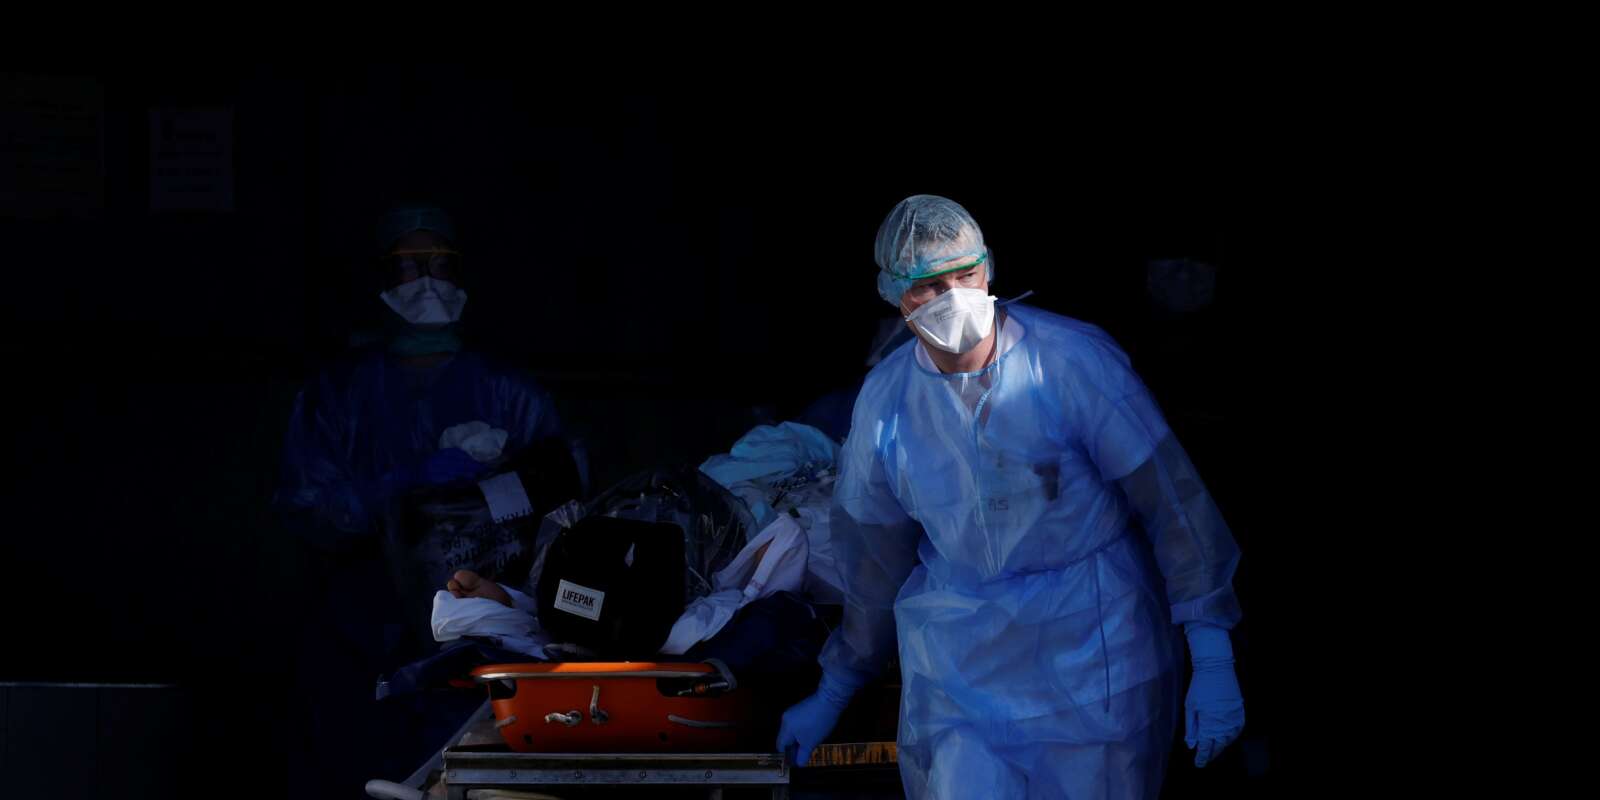 A patient infected with coronavirus is carried on a stretcher by a French rescue team before being transferred by a helicopter of the civil security (Securite Civile) from Strasbourg university hospital to Pforzheim in Germany as the spread of the coronavirus disease (COVID-19) continues in France, March 24, 2020. Picture taken March 24, 2020. REUTERS/Christian Hartmann